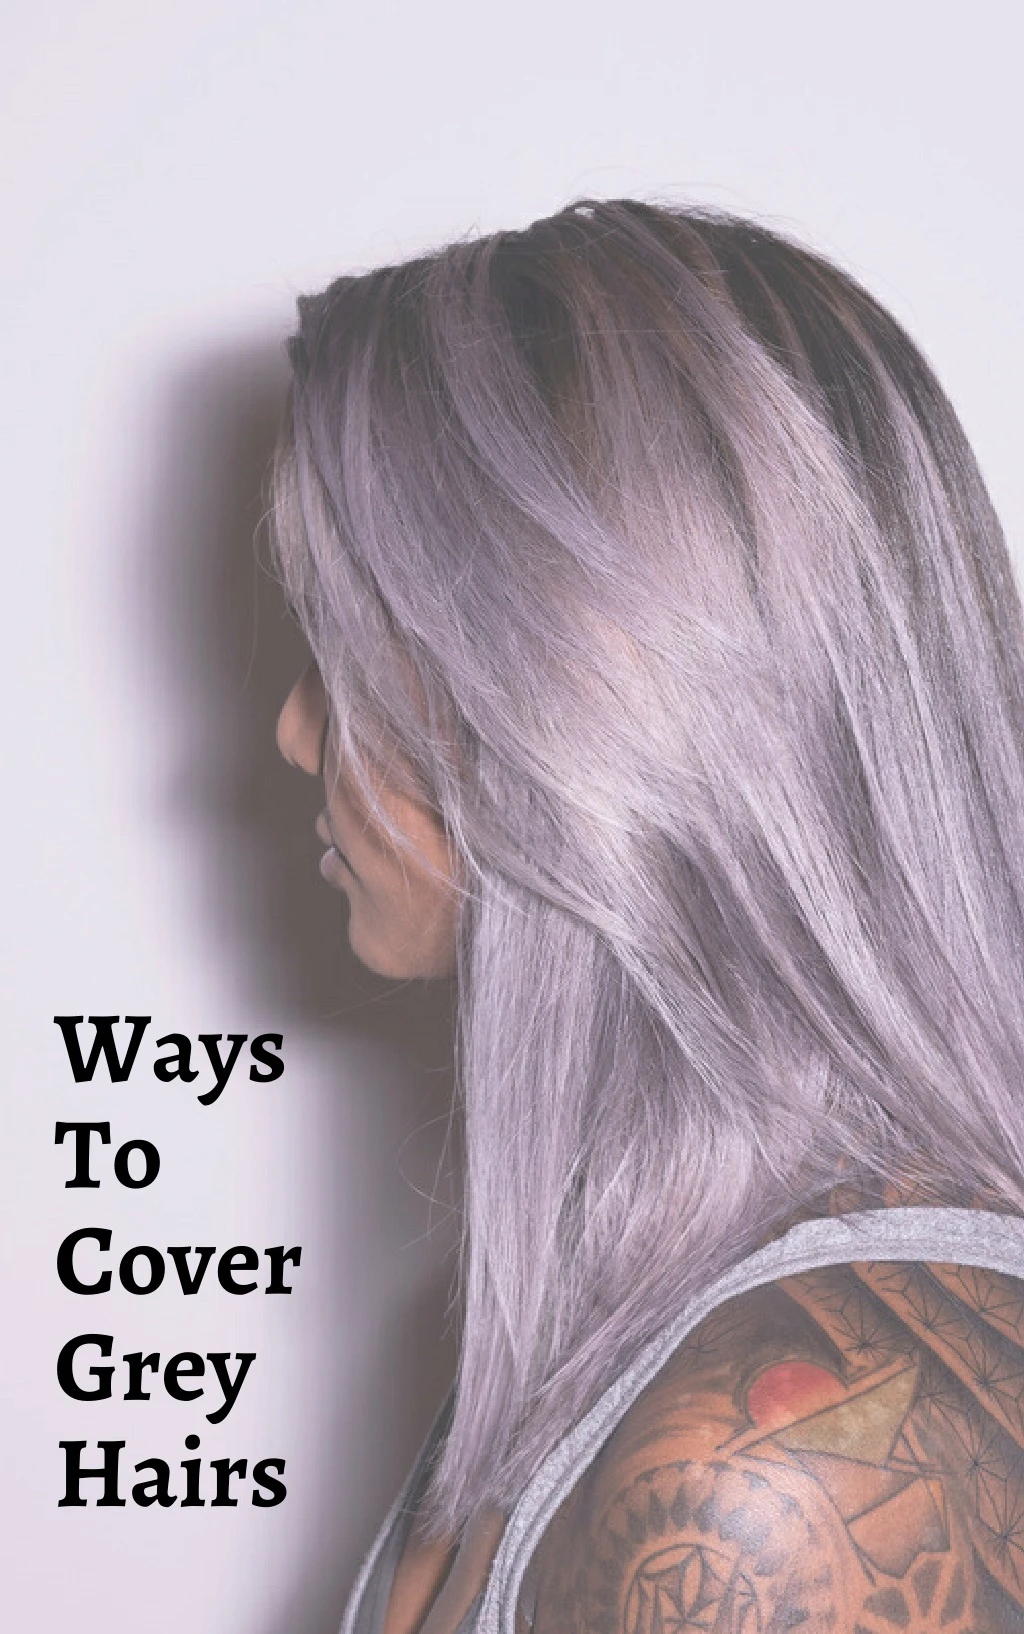 ways to cover grey hairs